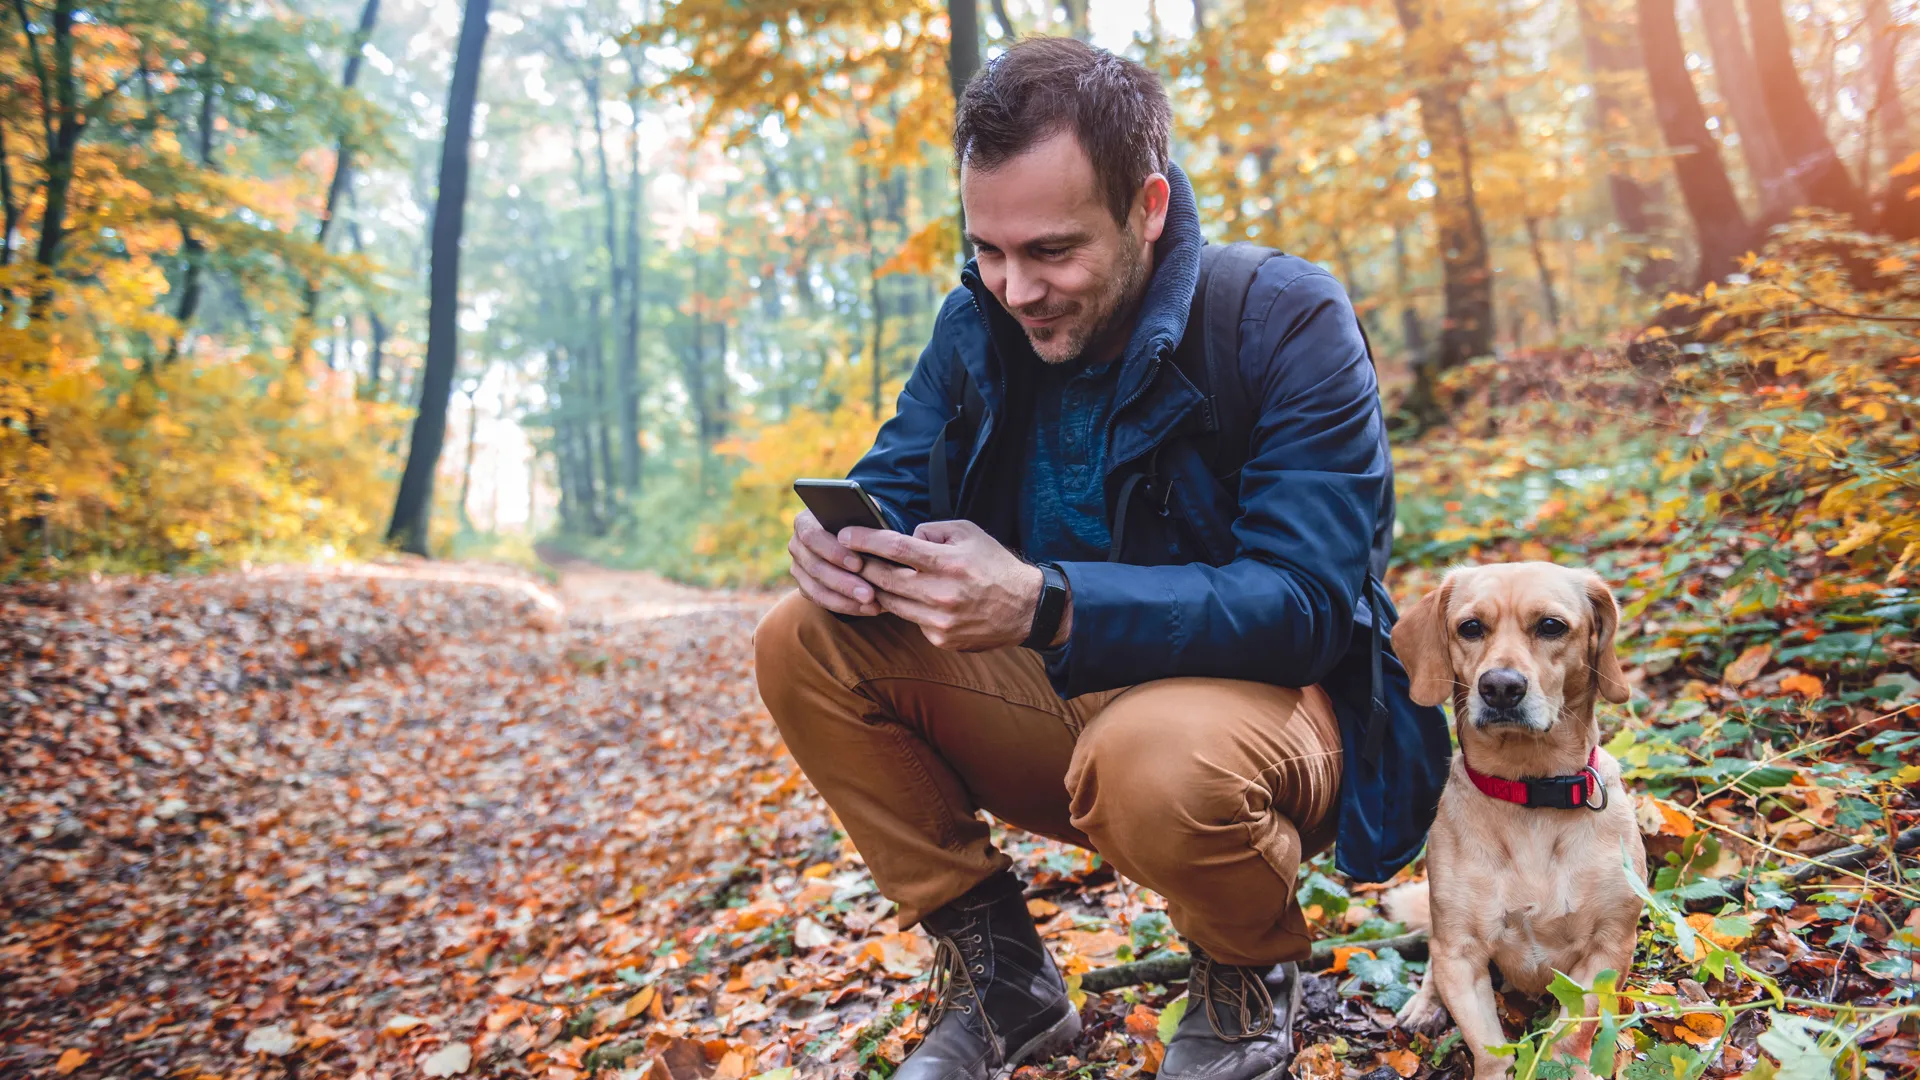 Man Squatting Next To small yellow Dog and using phone in autumn forest.